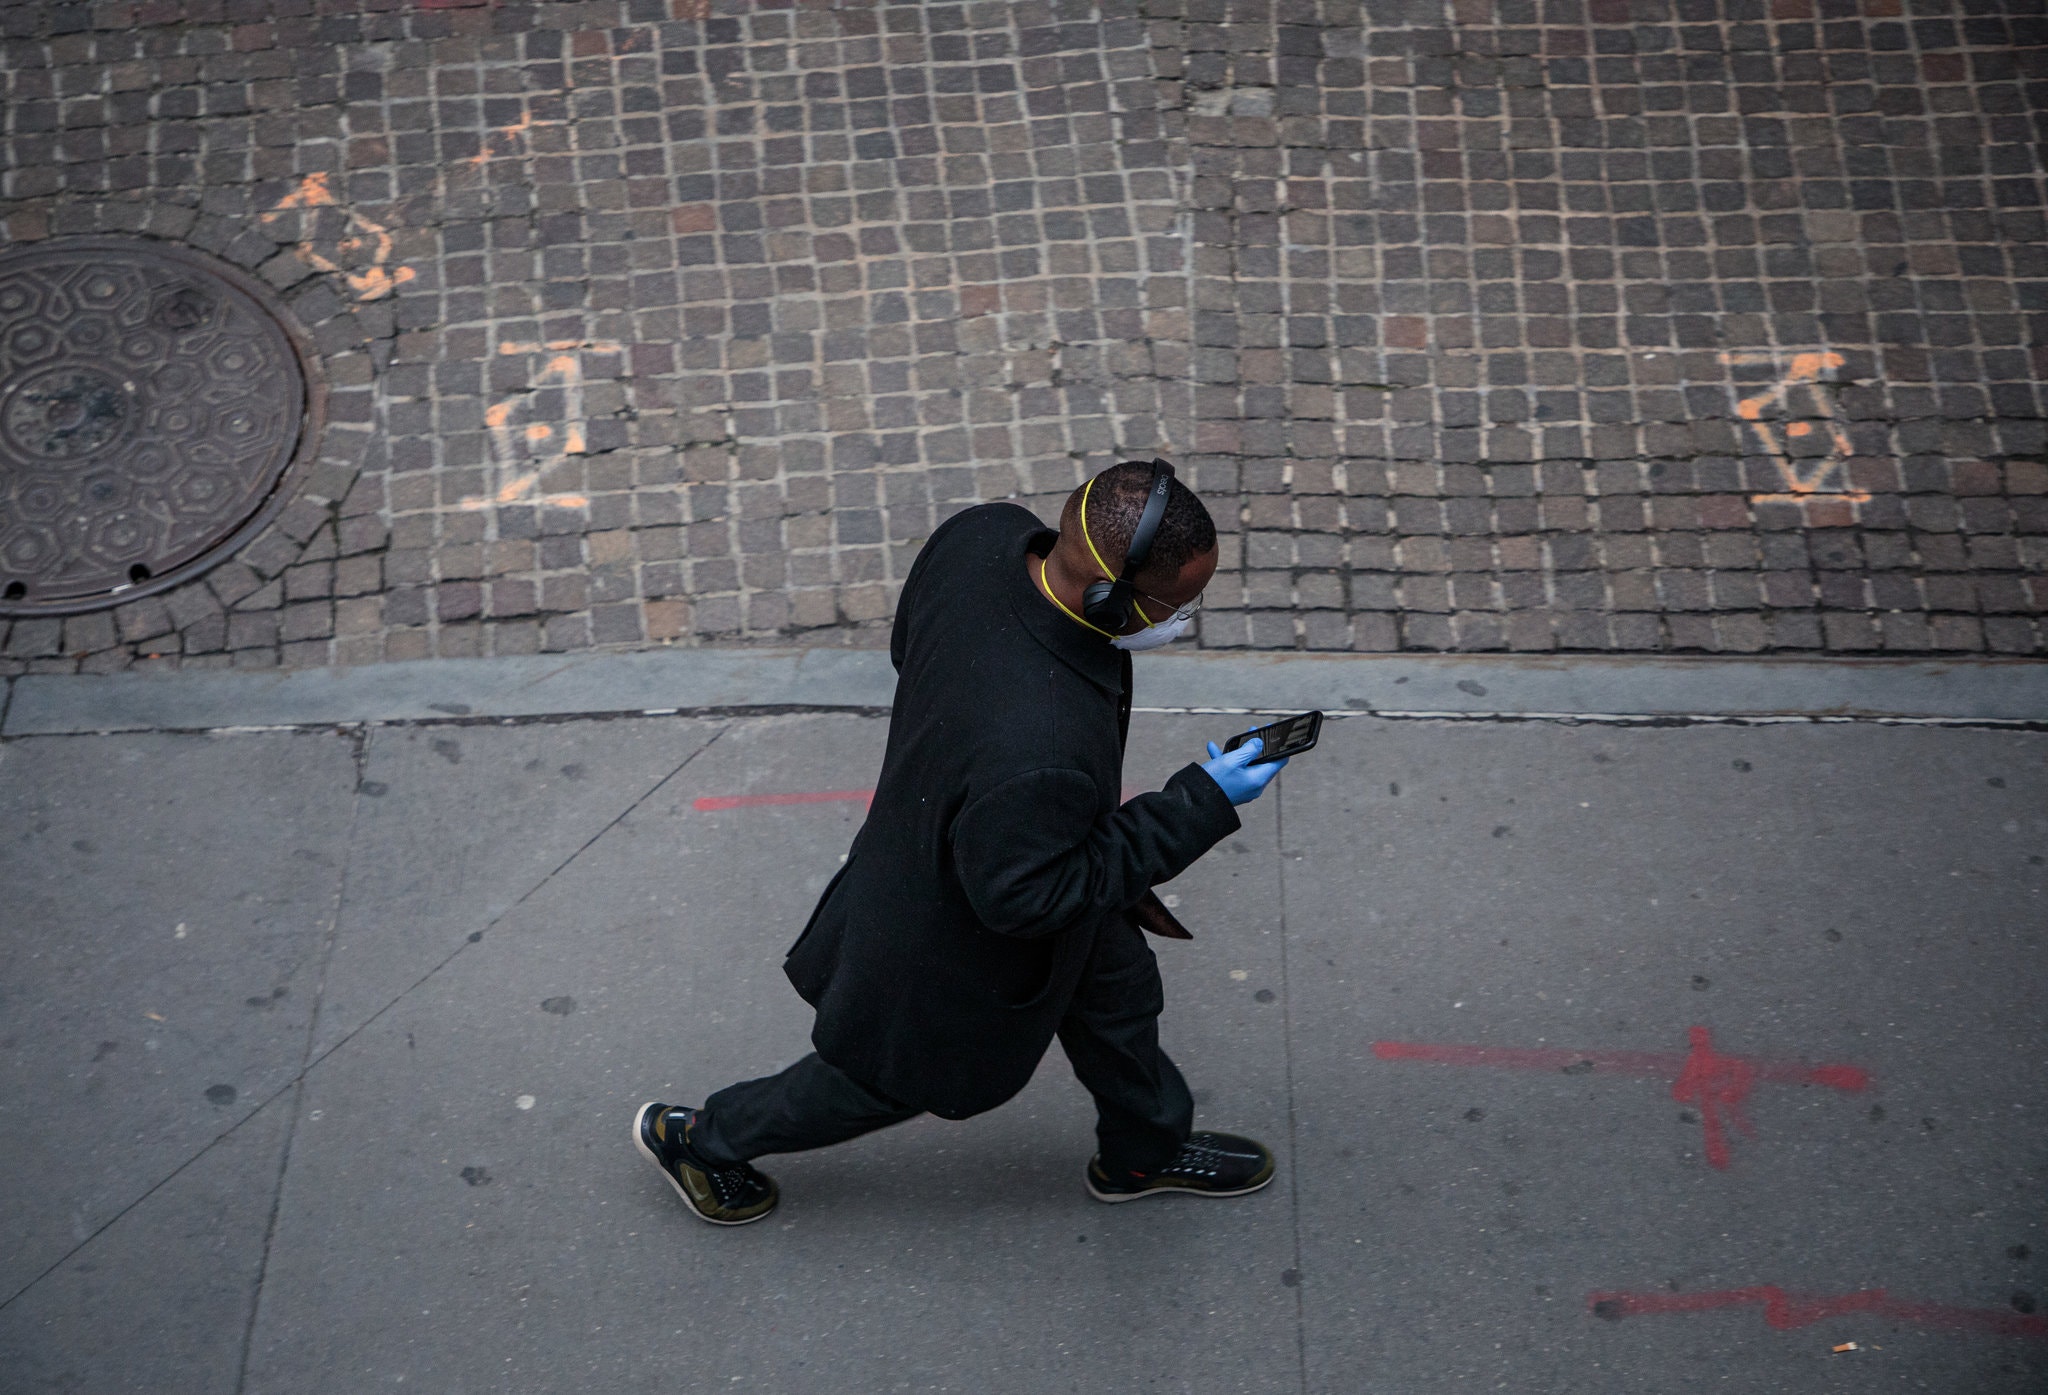 Birdseye view of a man walking down a street wearing a black coat, sneakers, headphones, a protective face mask and hospital gloves looking at his cell phone.